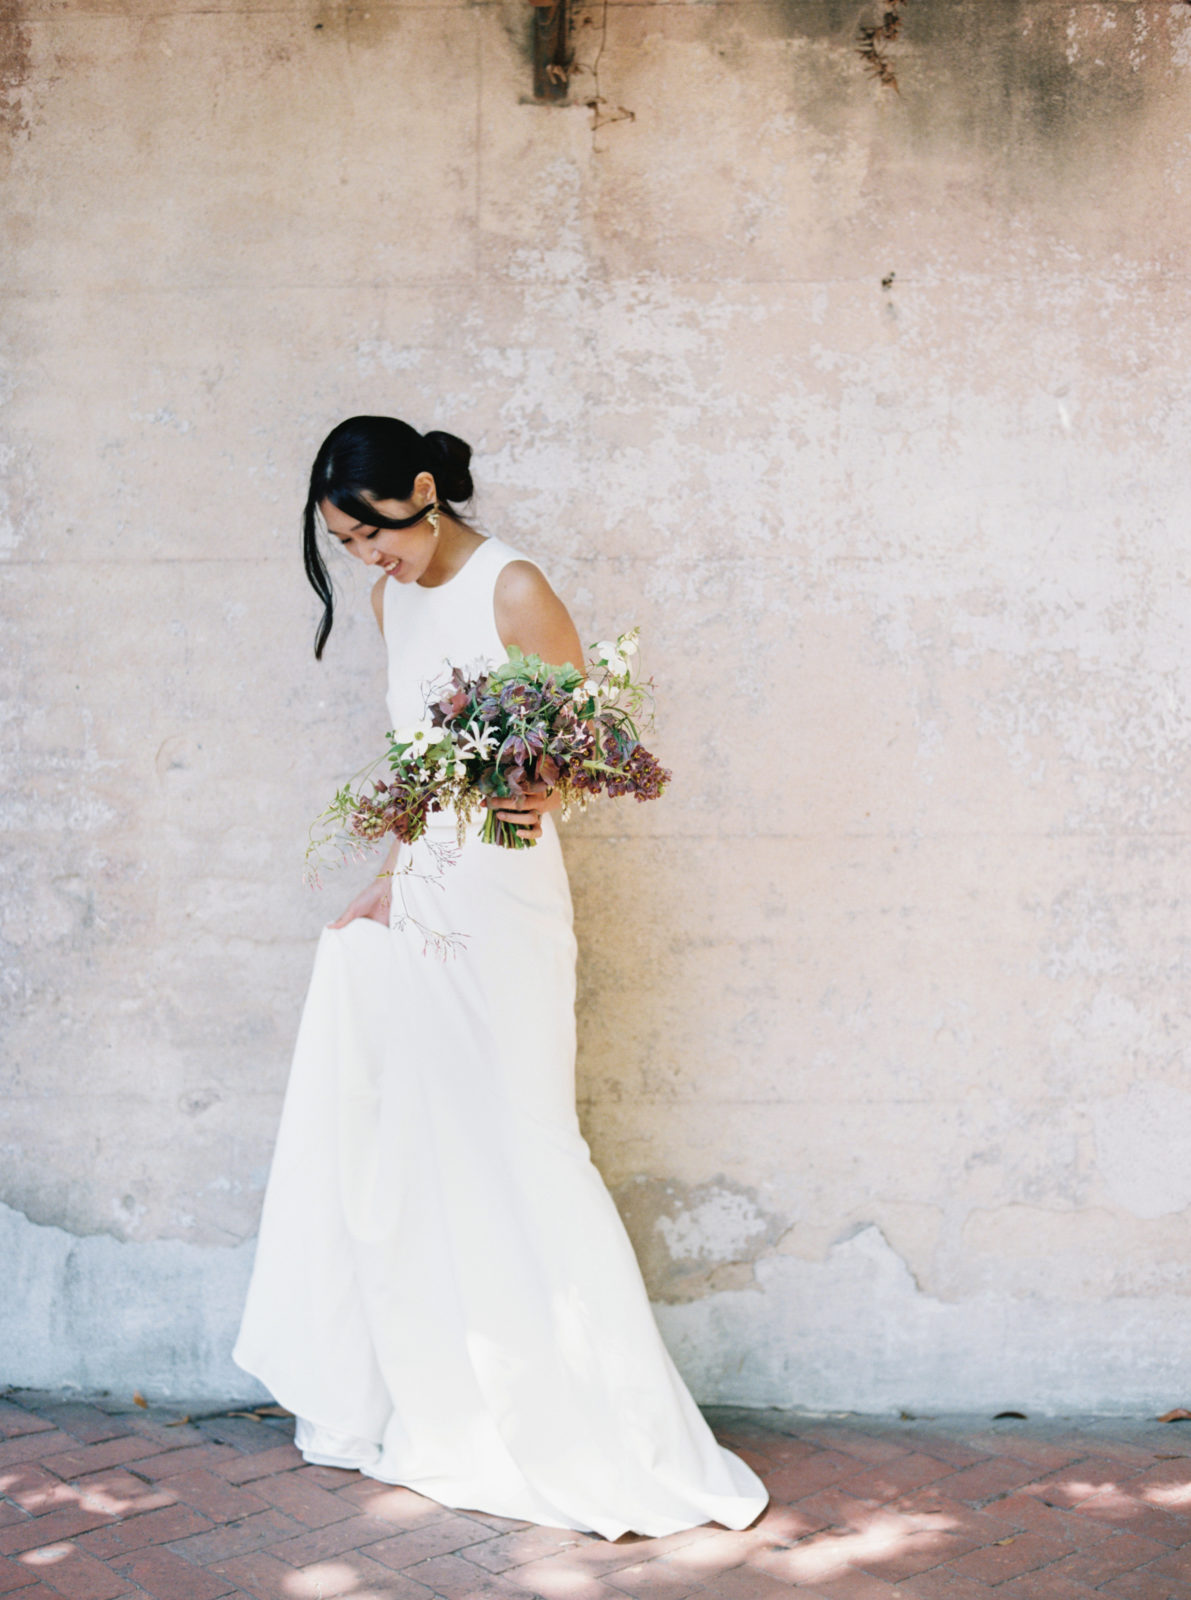 Bride holds dress and looks down while standing against rustic building holding a colorful bouquet in Savannah, Georgia.